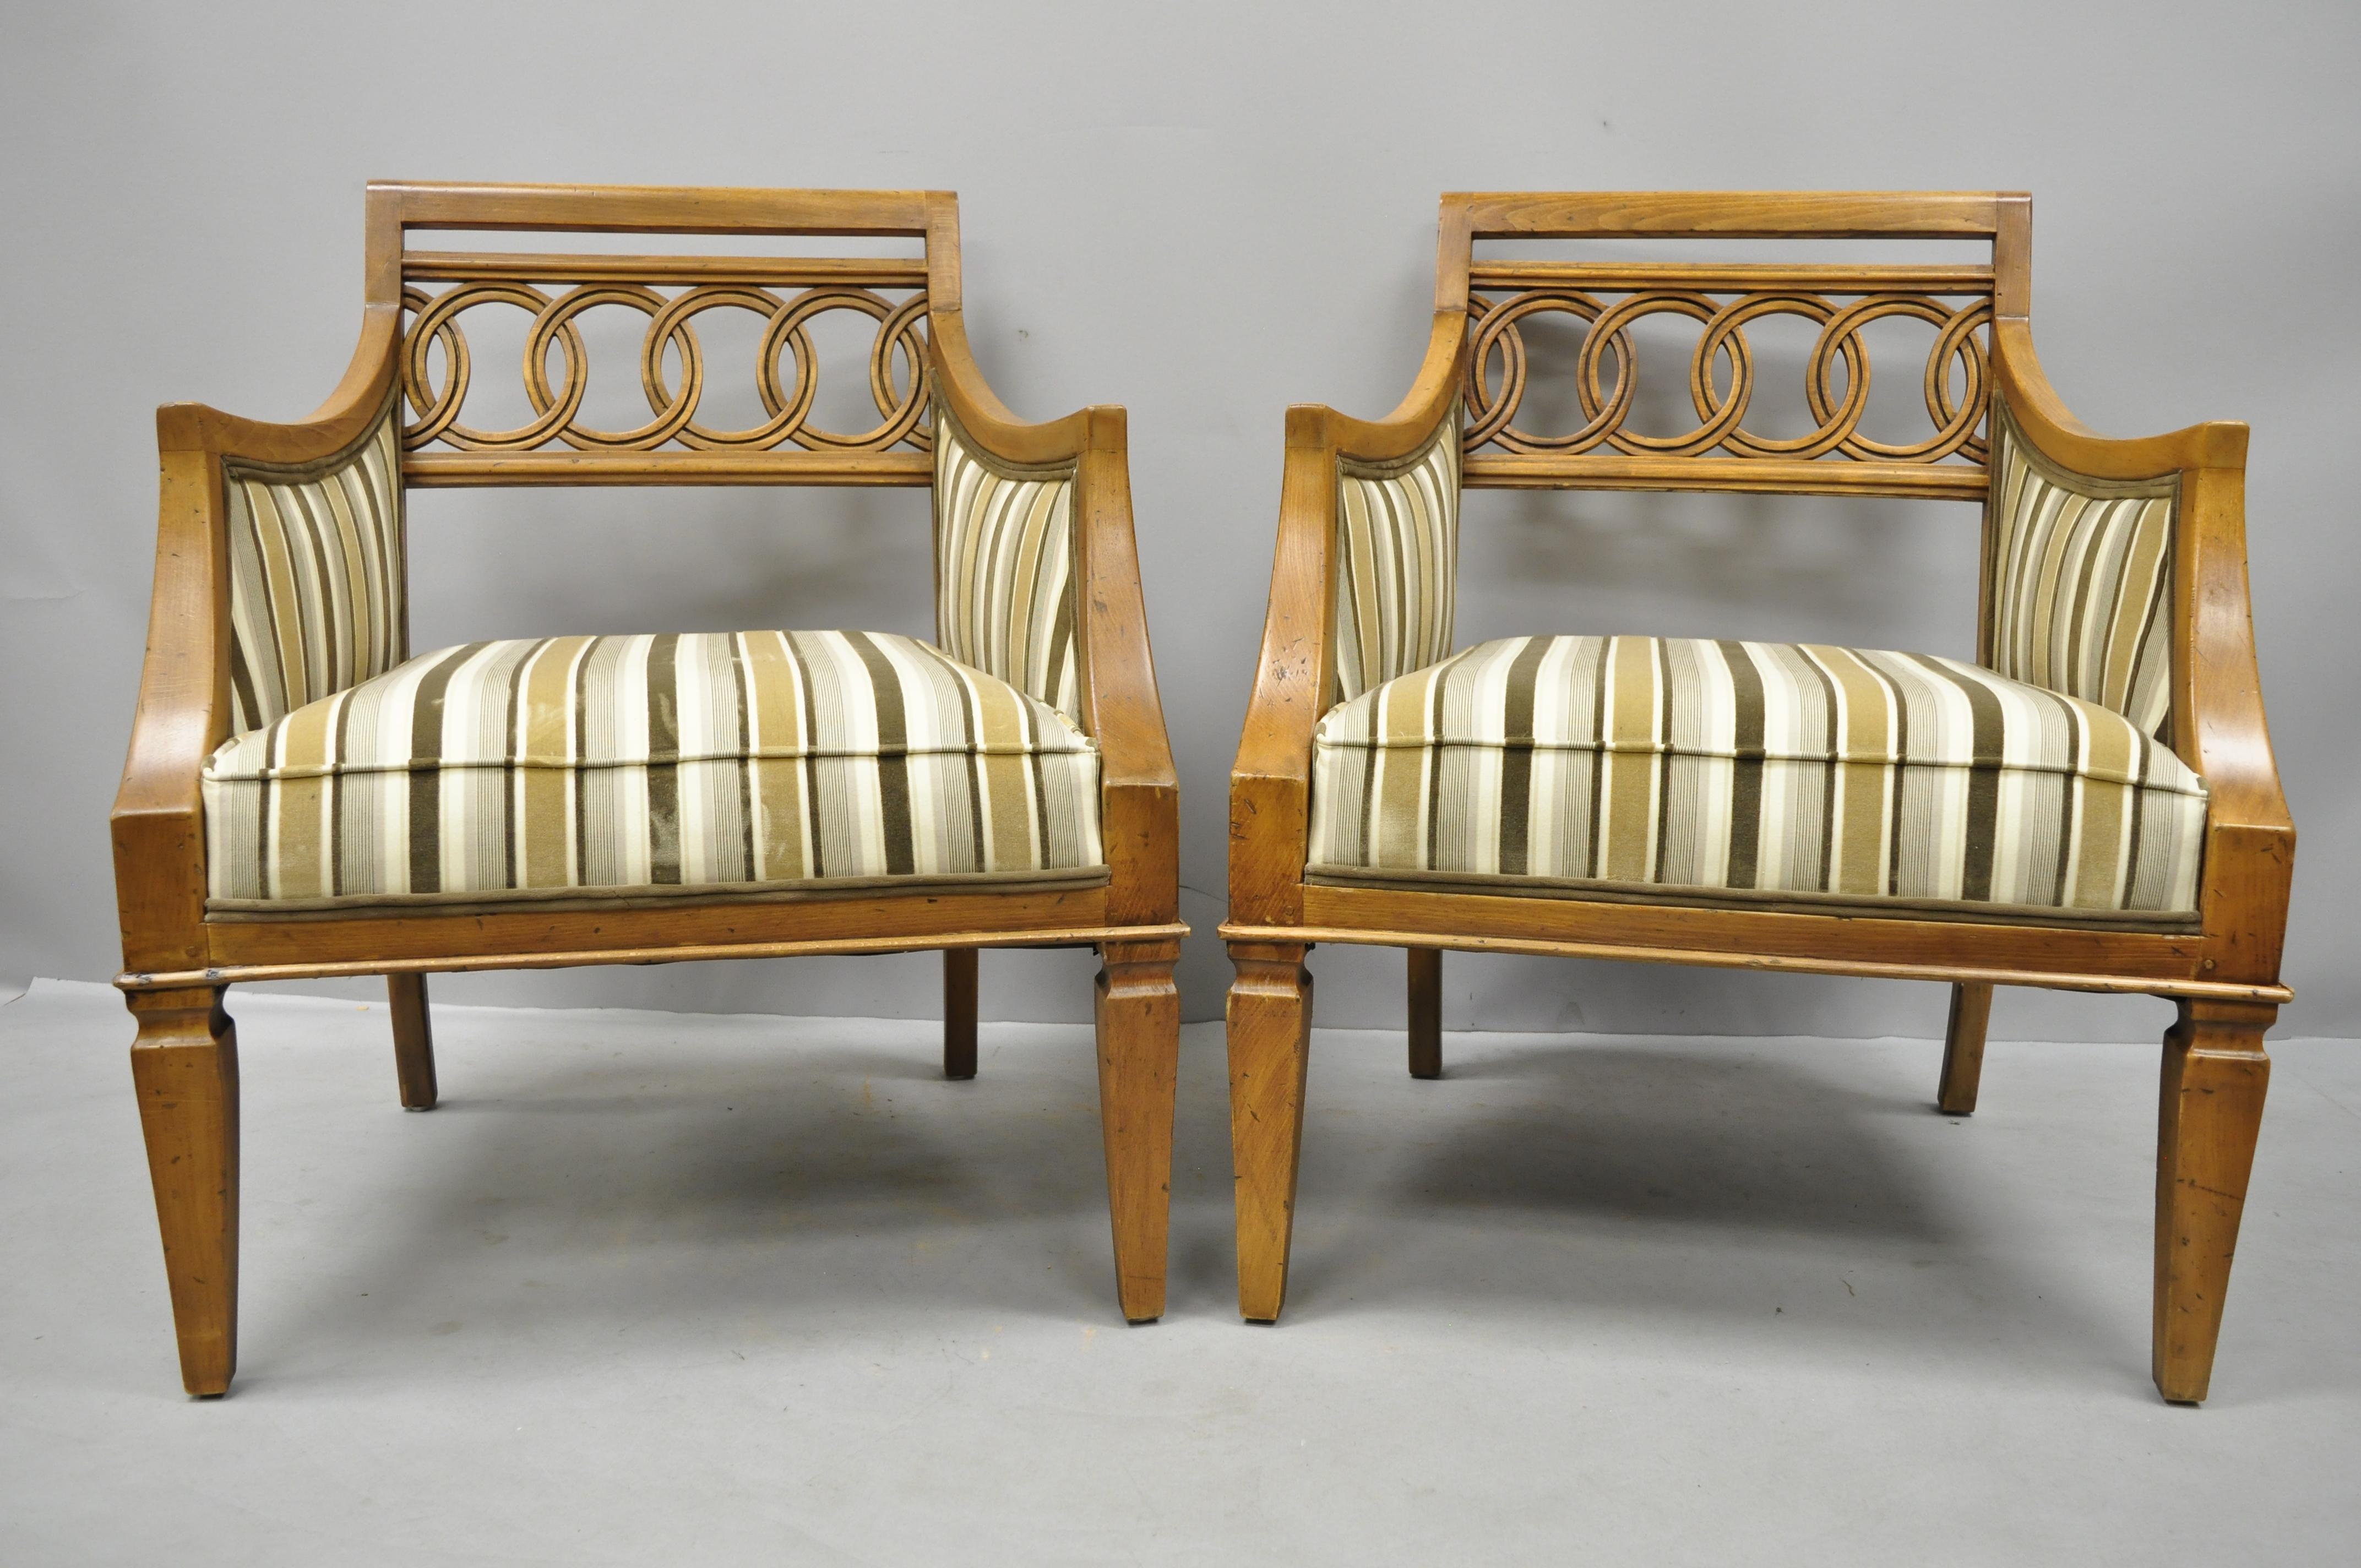 Pair of Hollywood Regency French style carved spiral back armchairs. Items feature striped upholstered seats, carved backs, solid wood construction, beautiful wood grain, distressed finish, tapered legs, sleek sculptural form, circa late 20th